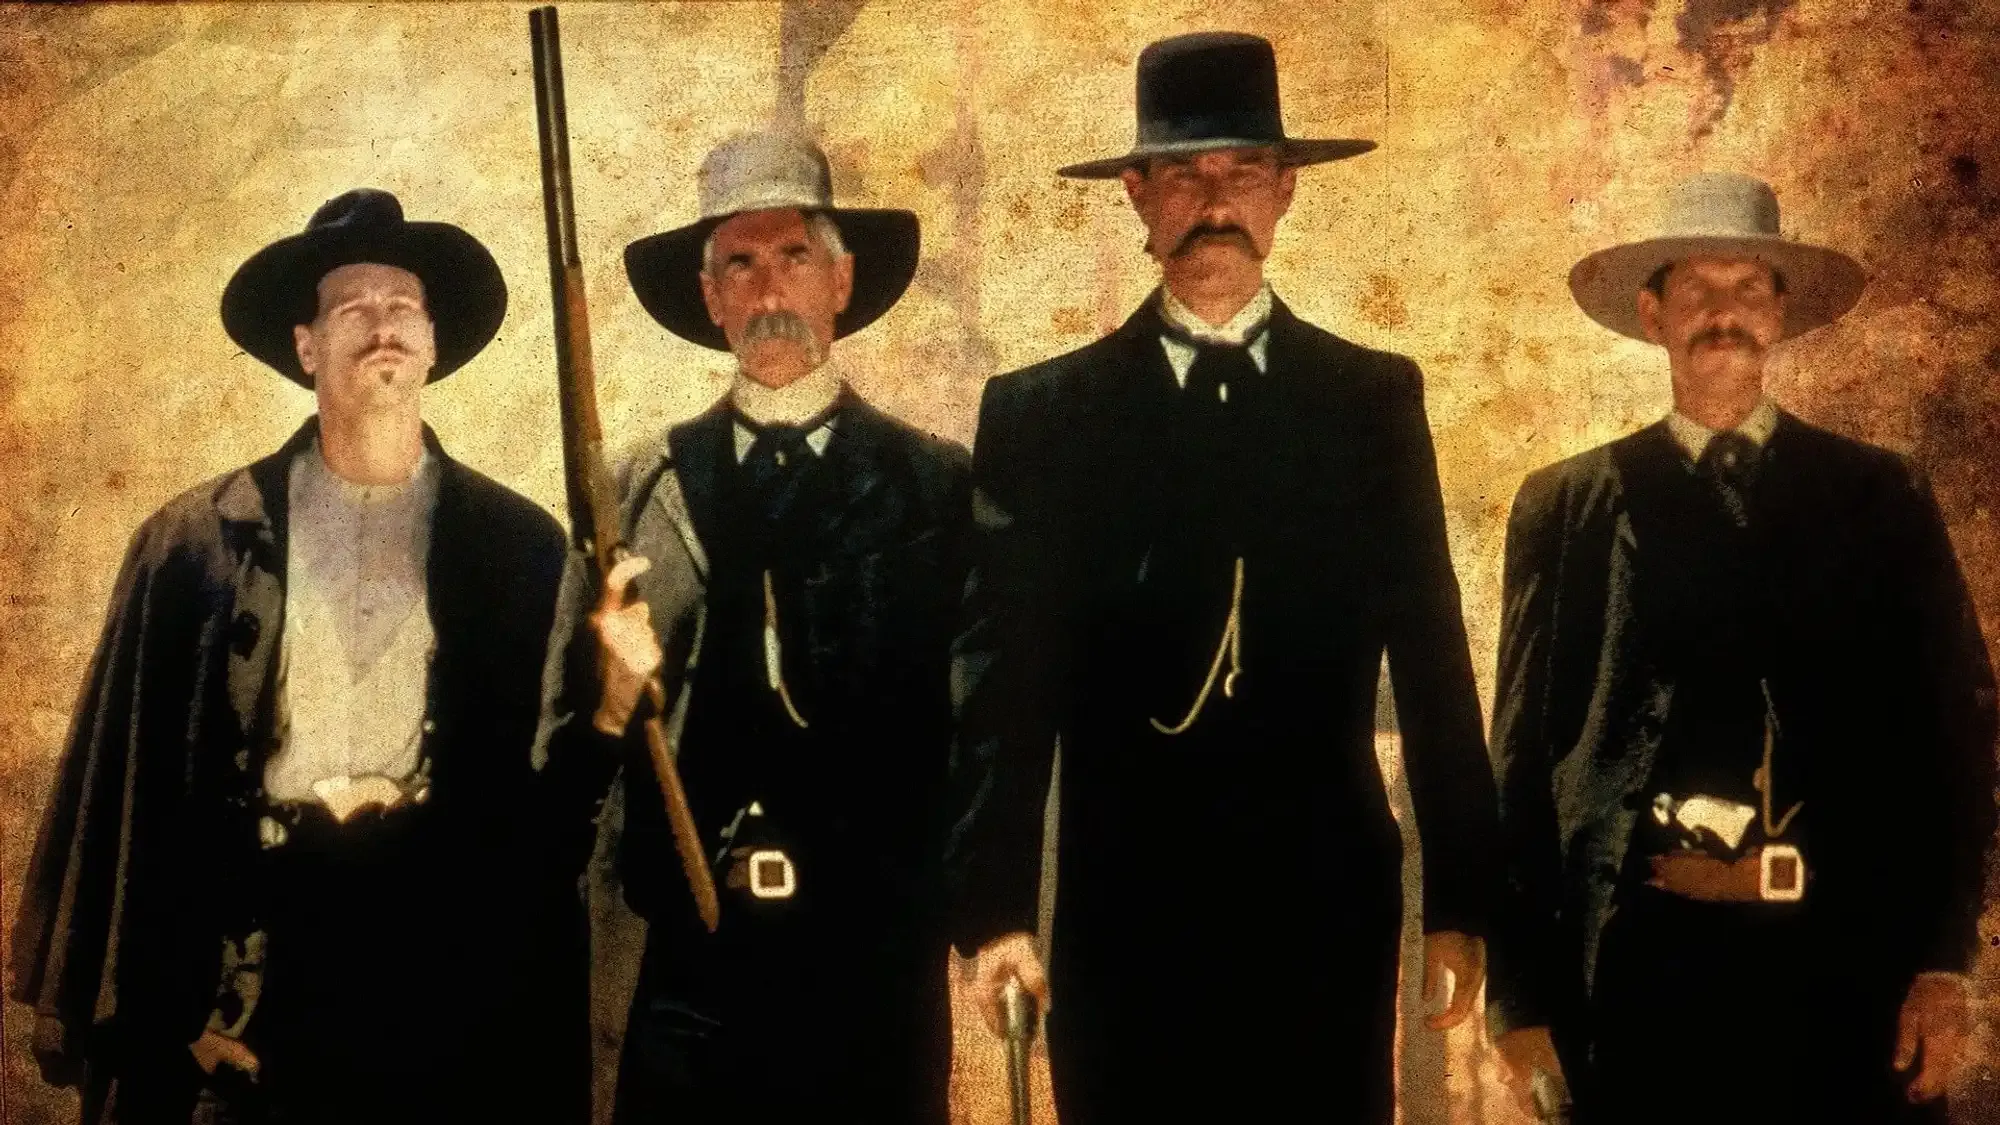 Tombstone movie review